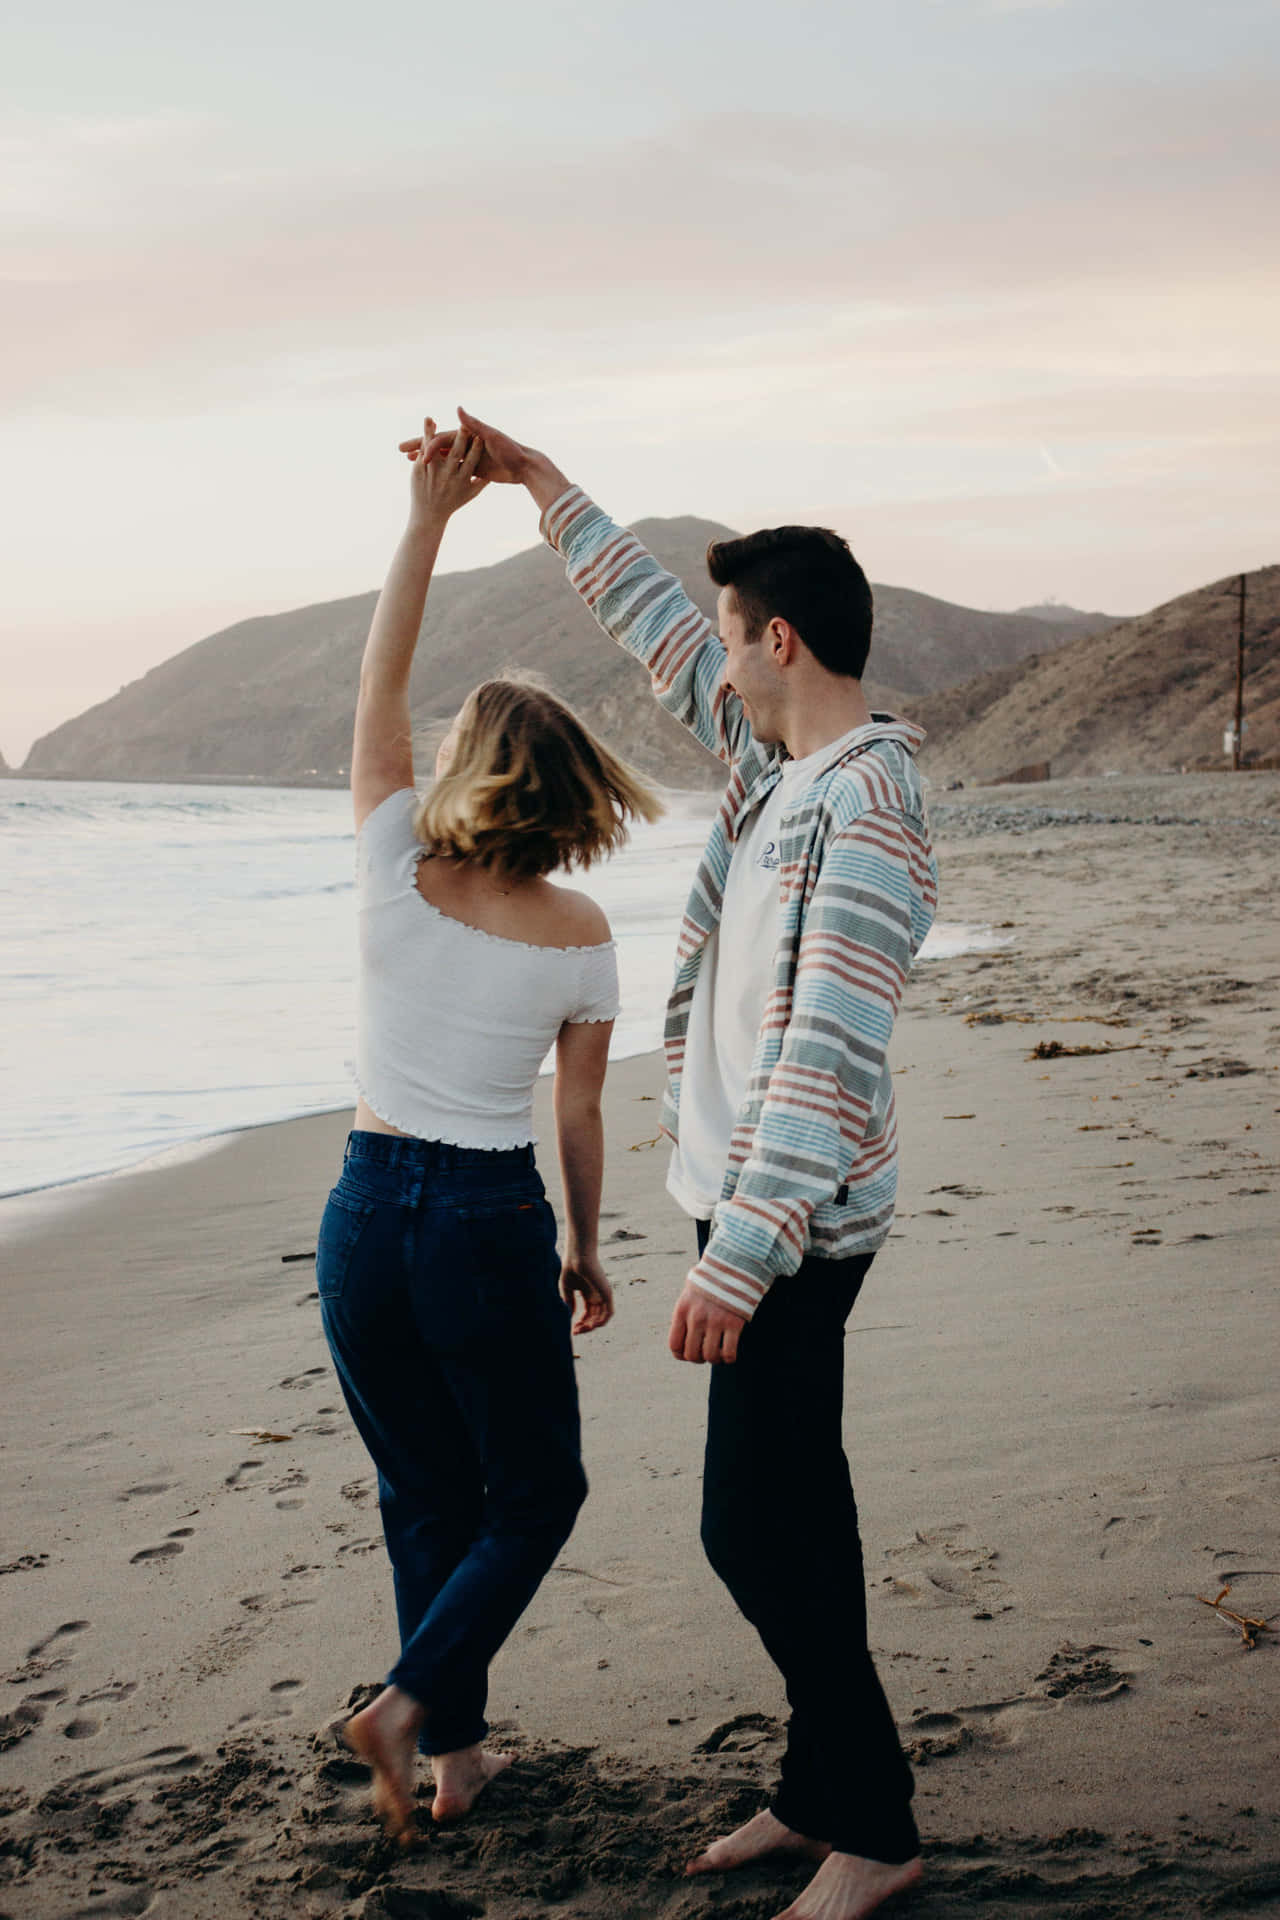 Couple At Beach Dancing With Spin Picture